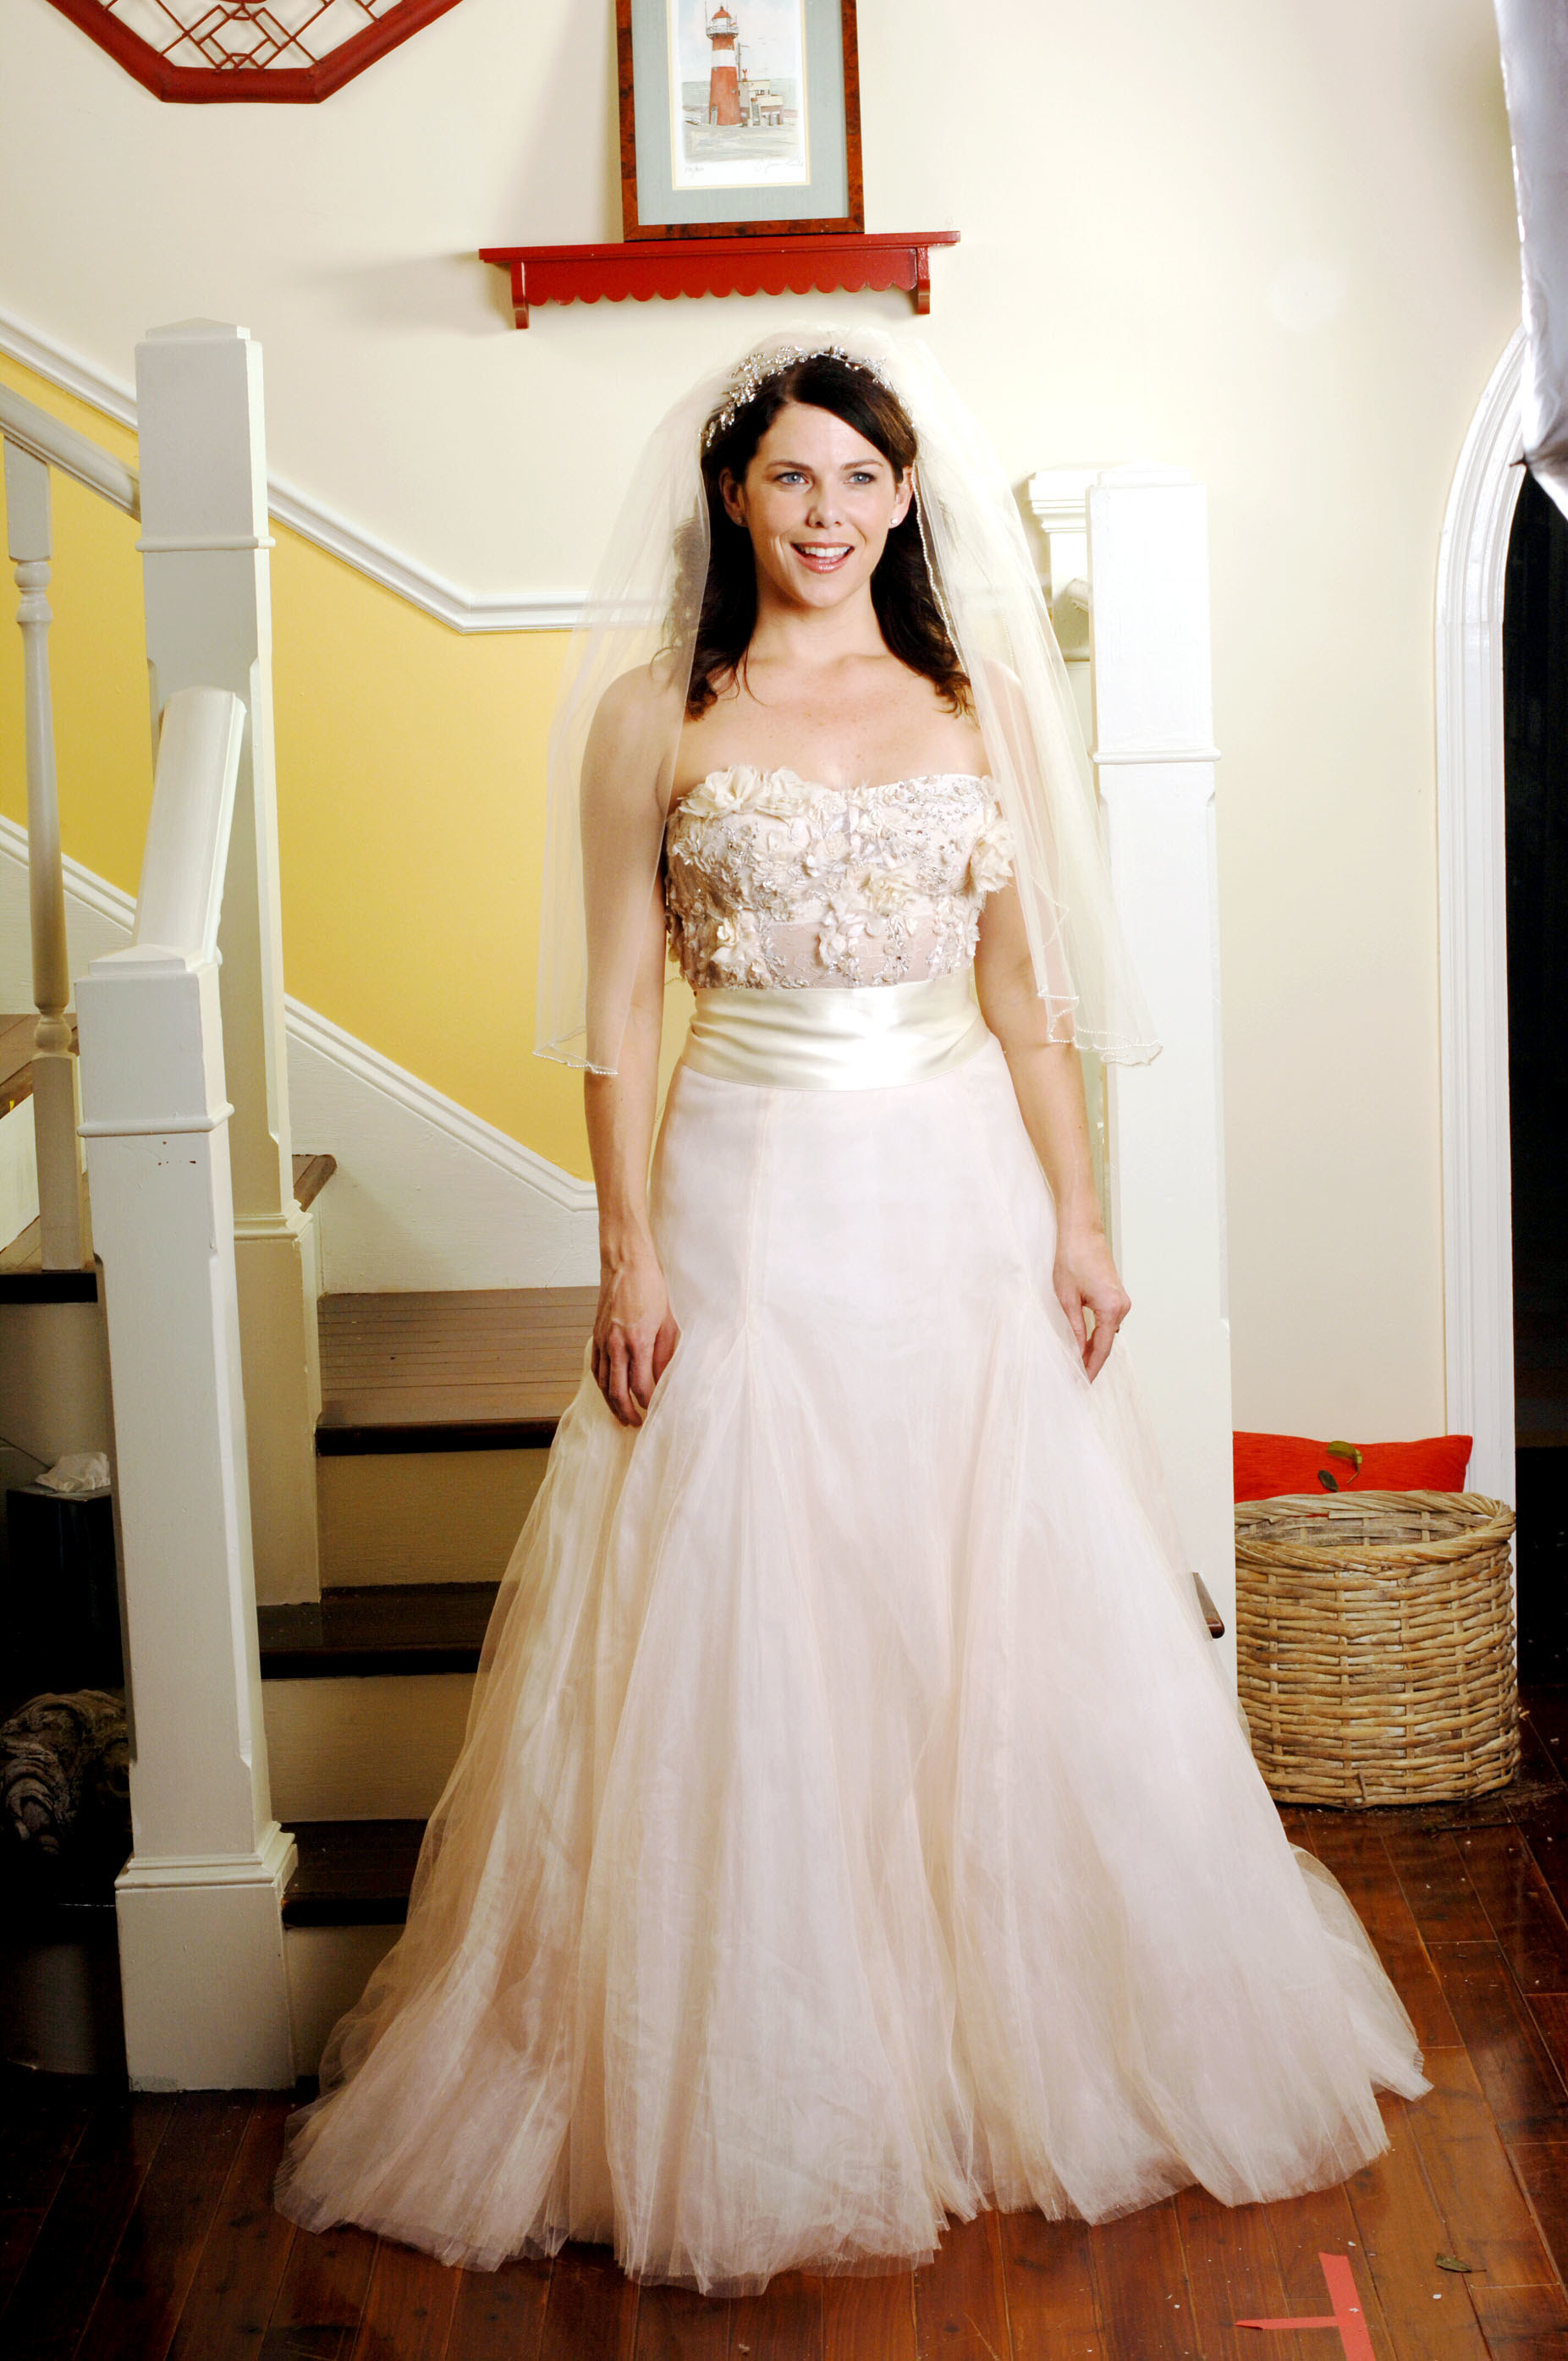 Lorelai wearing a strapless dress with an embroidered top and a somewhat big skirt